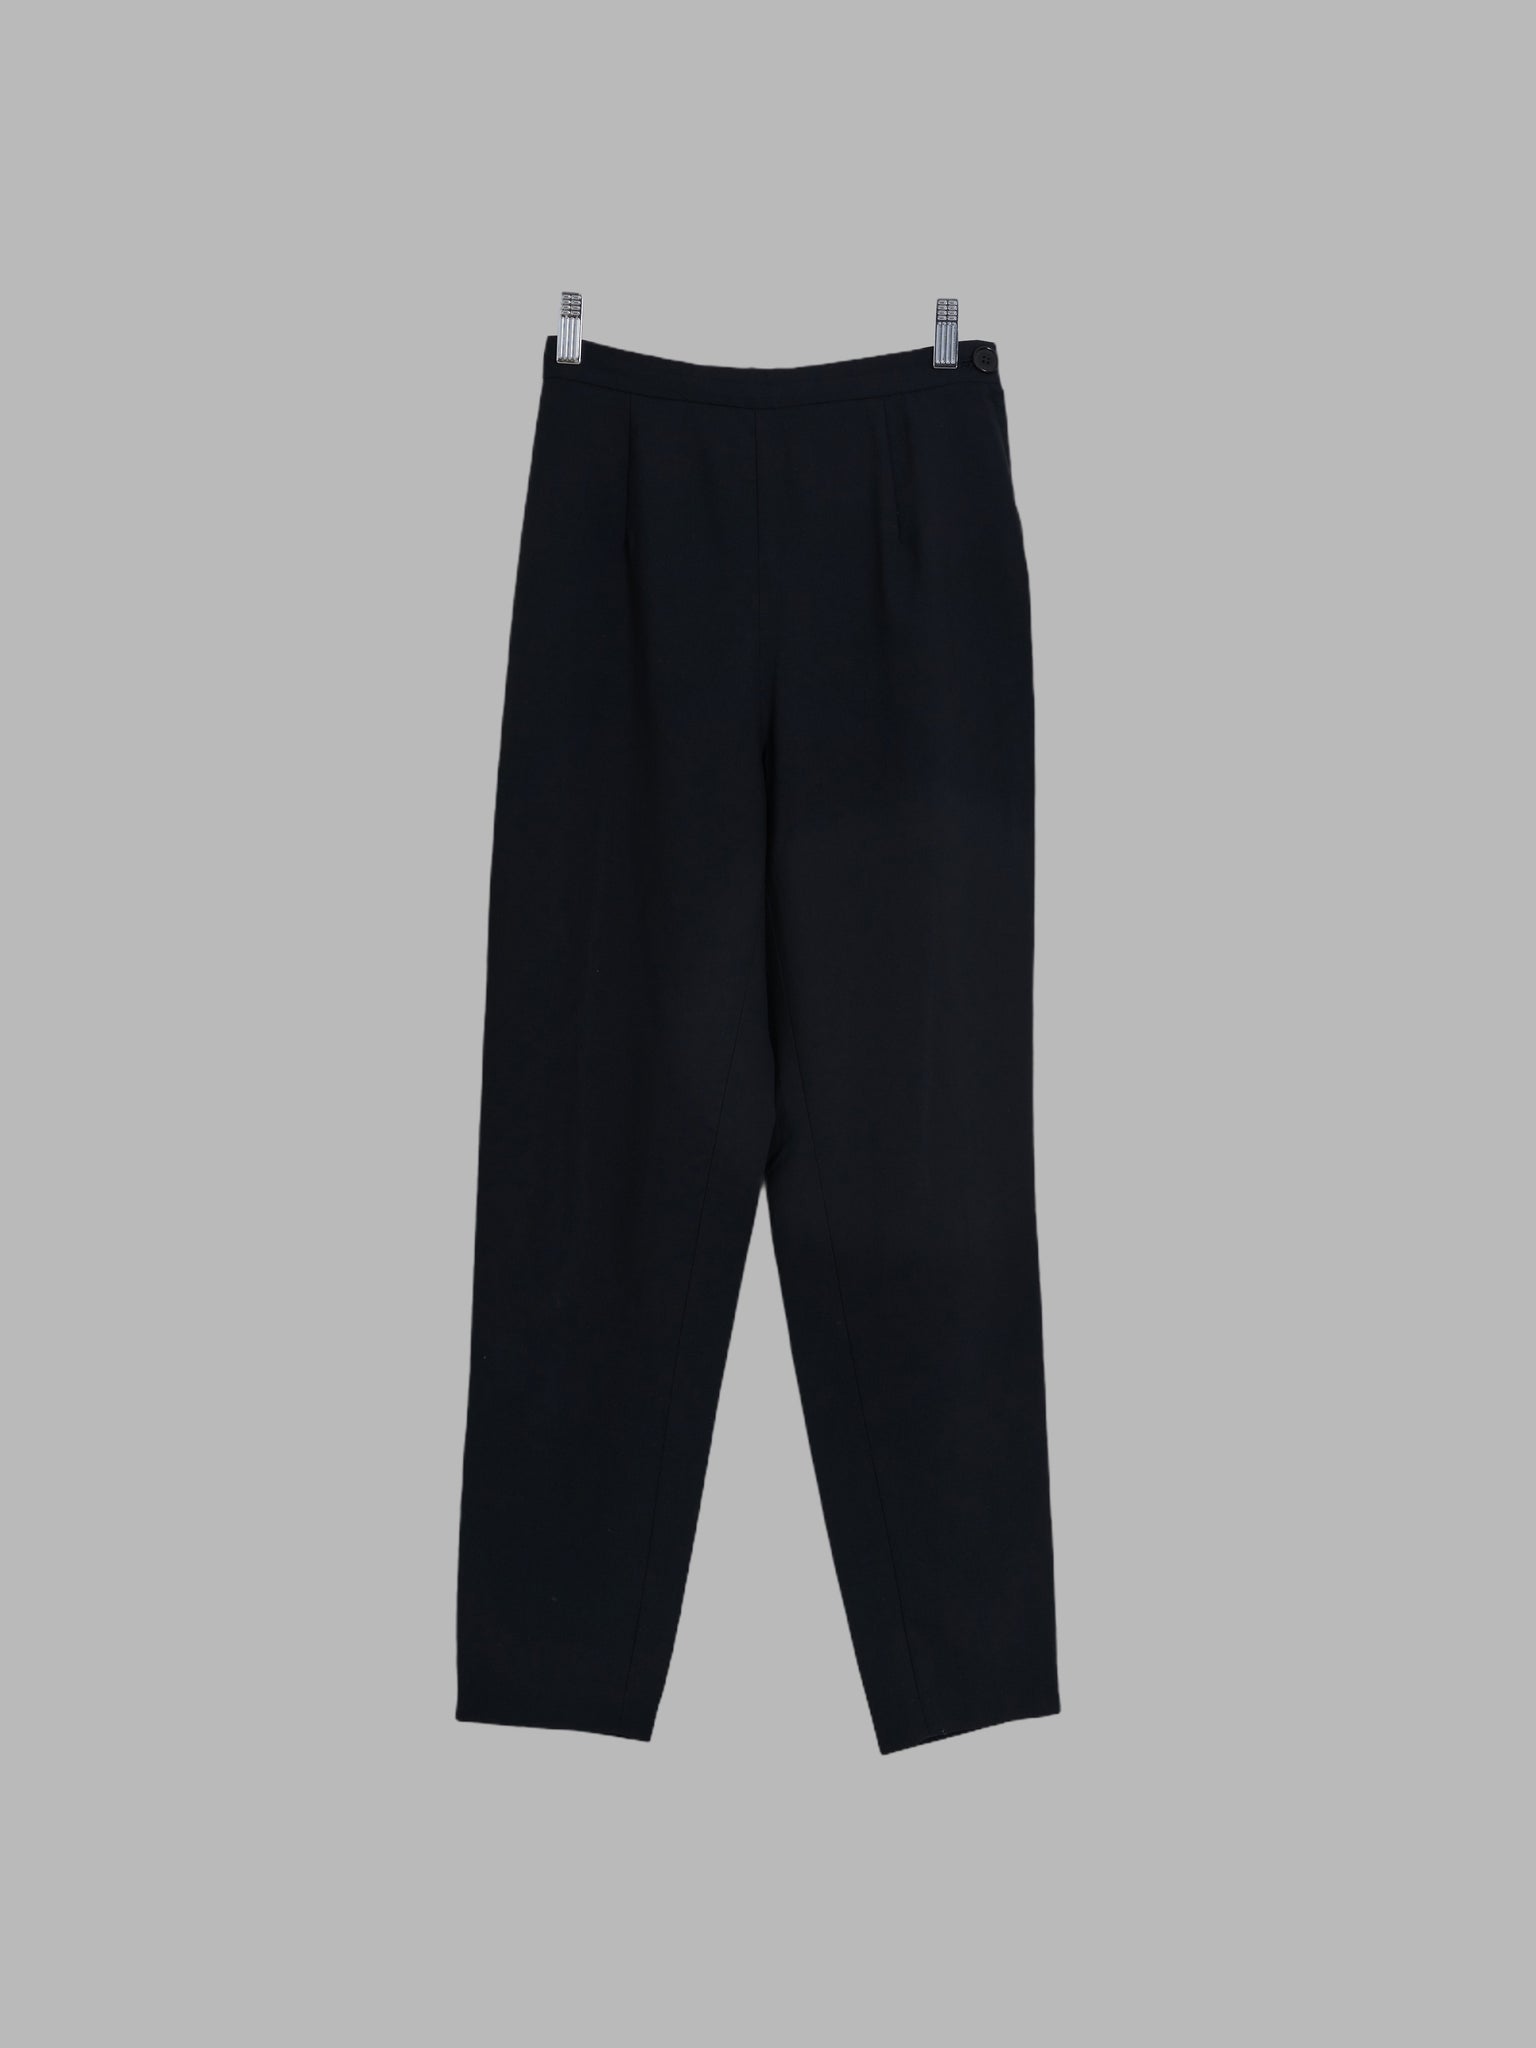 Tricot Comme des Garcons 1991 black wool side zip tapered trousers